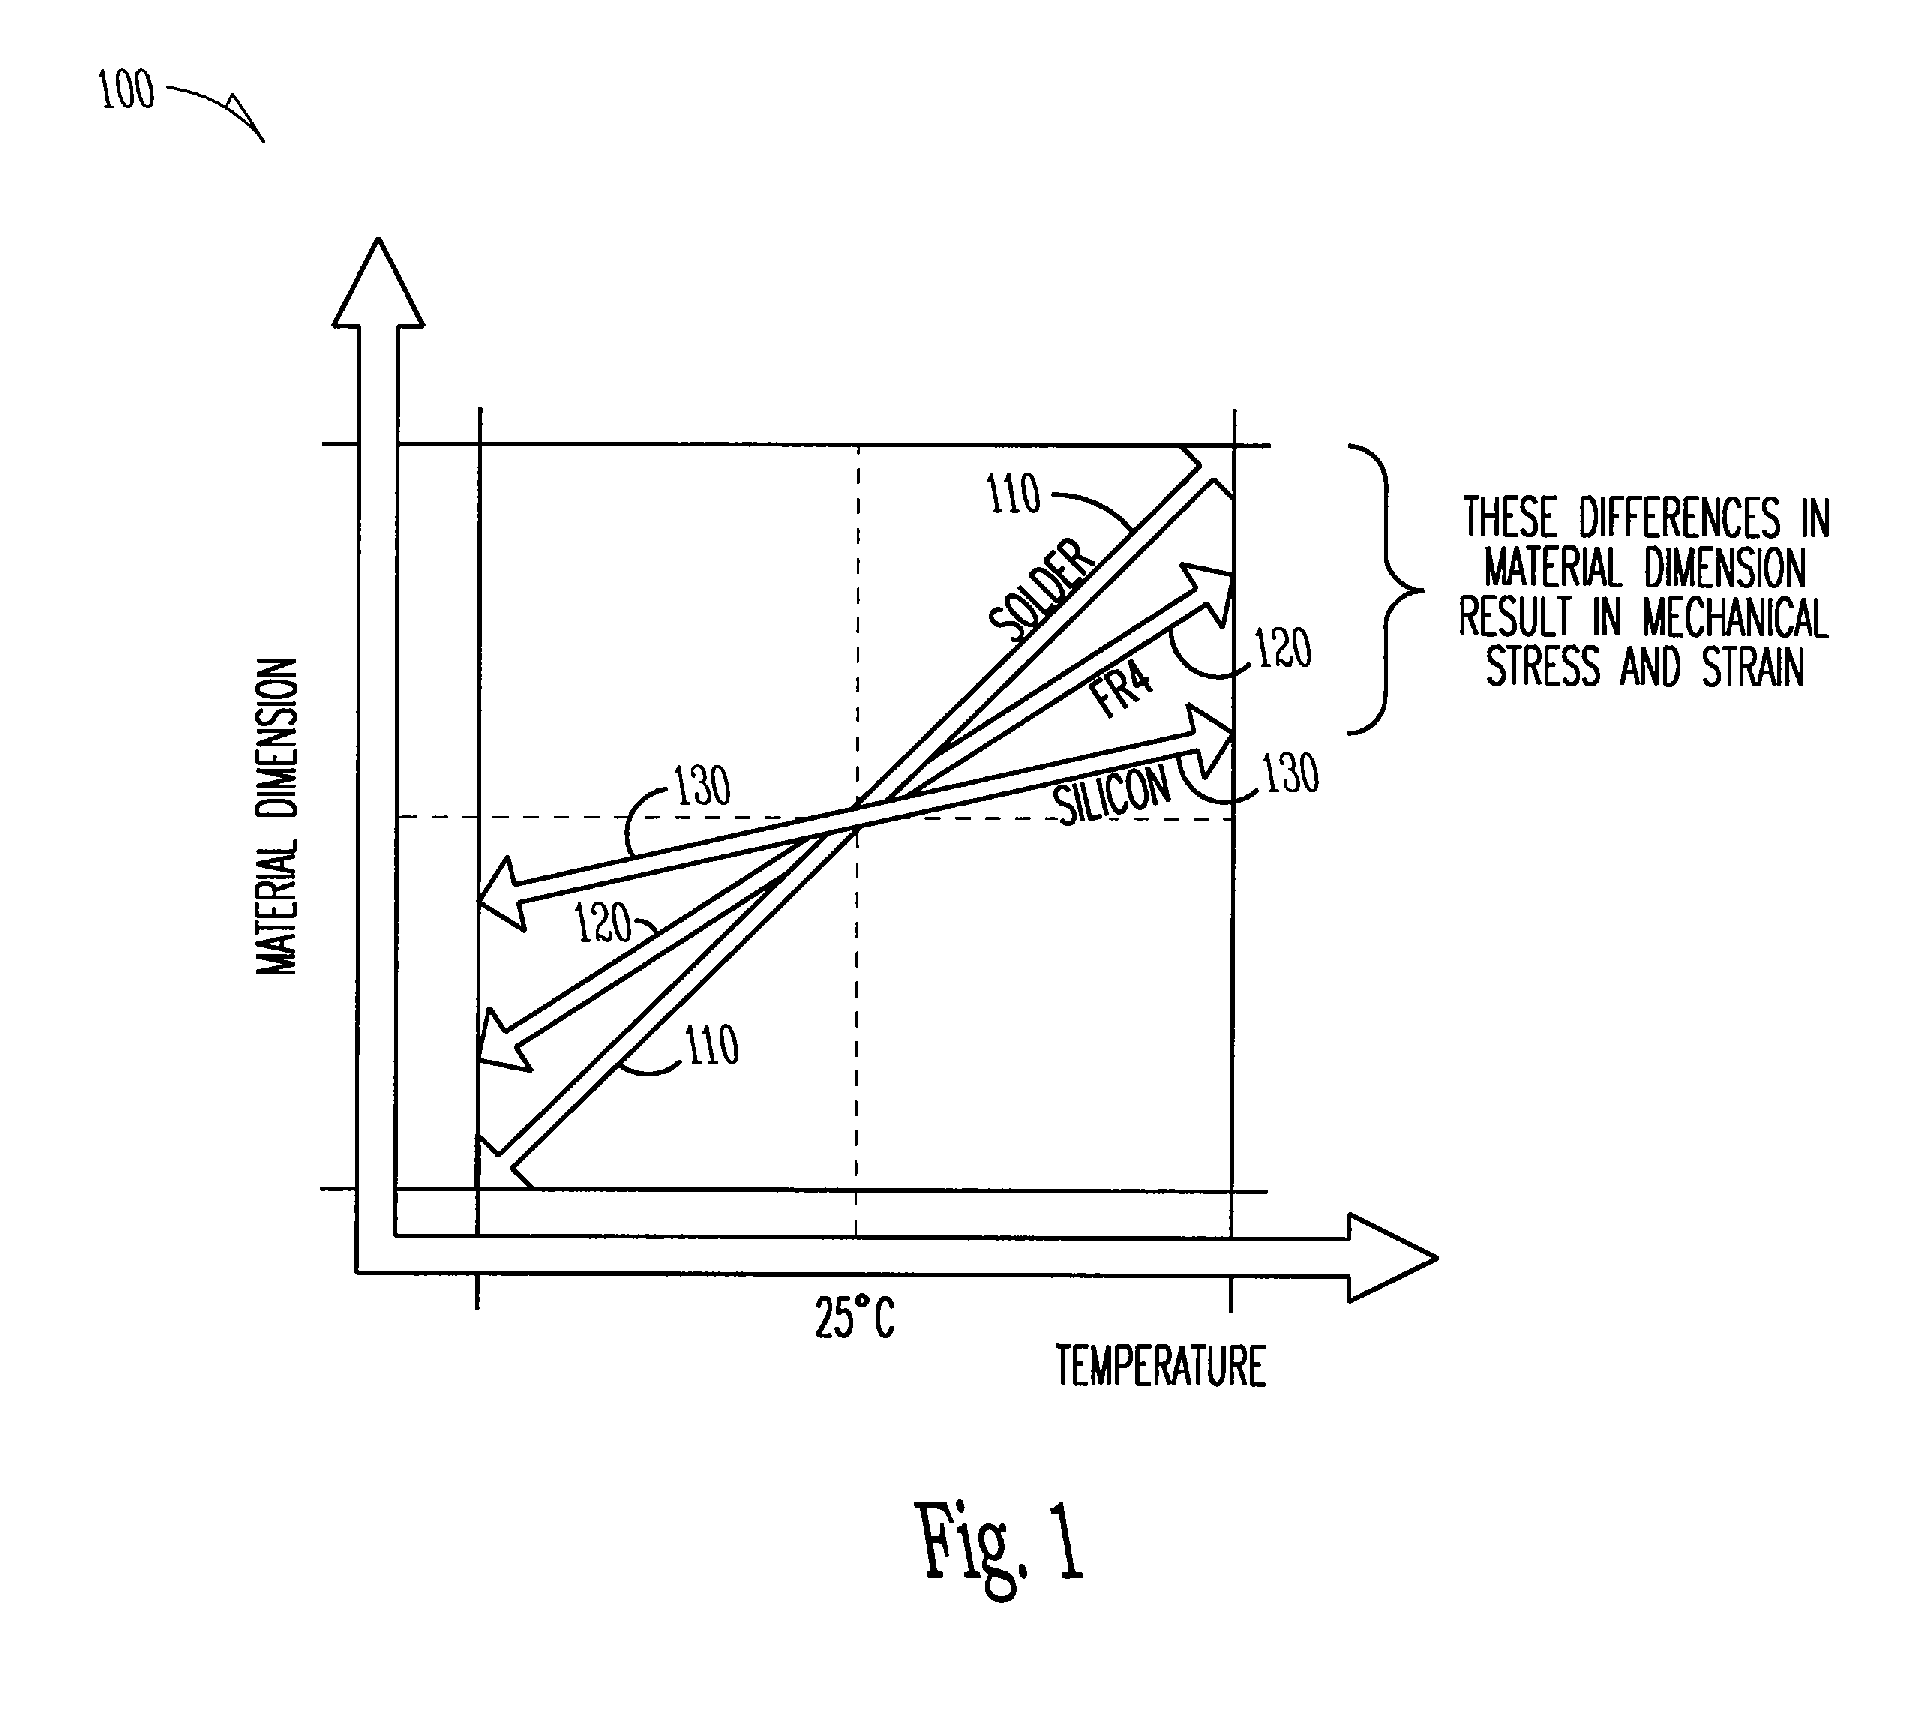 Thermal stratification test apparatus and method providing cyclical and steady-state stratified environments